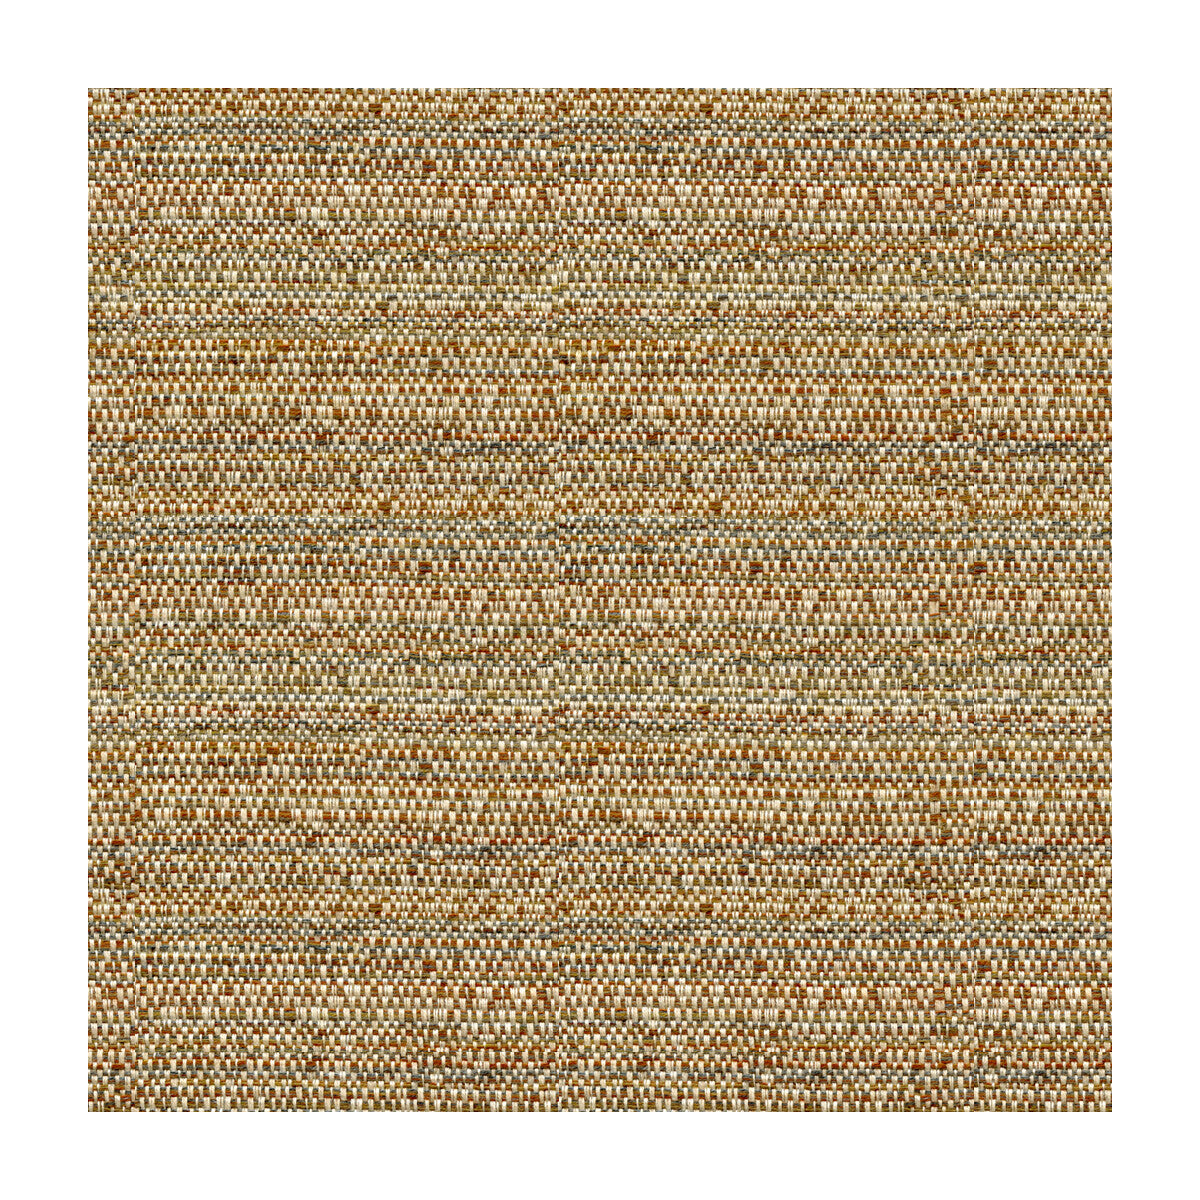 Kravet Couture fabric in 31695-616 color - pattern 31695.616.0 - by Kravet Couture